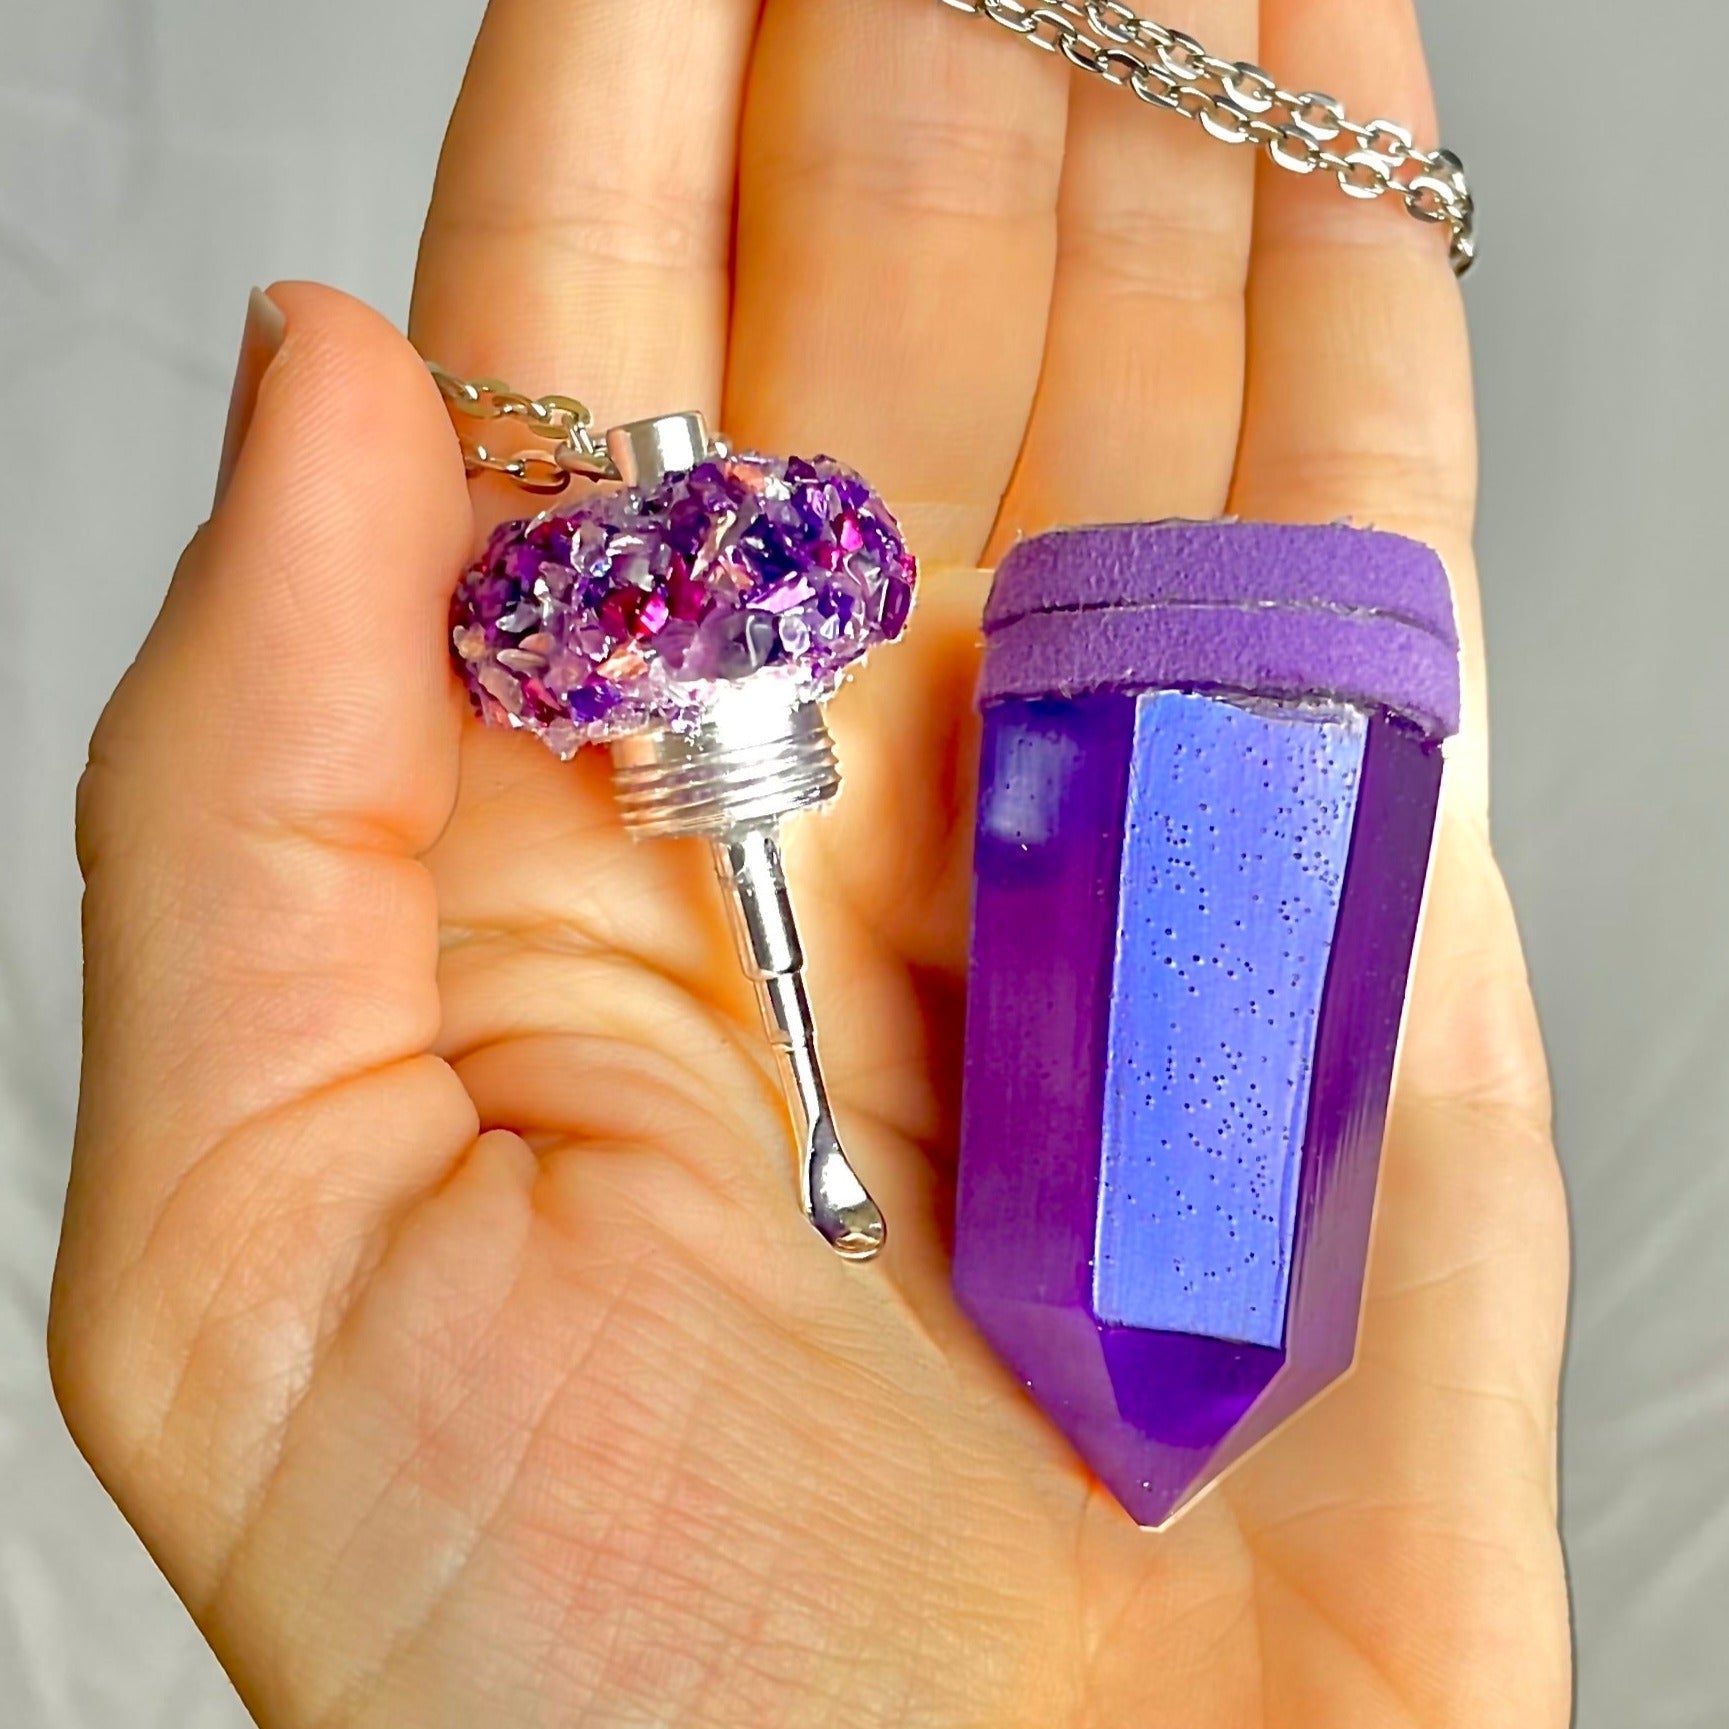 Crystal Stash Necklace With Spoon – Rave Fashion Goddess